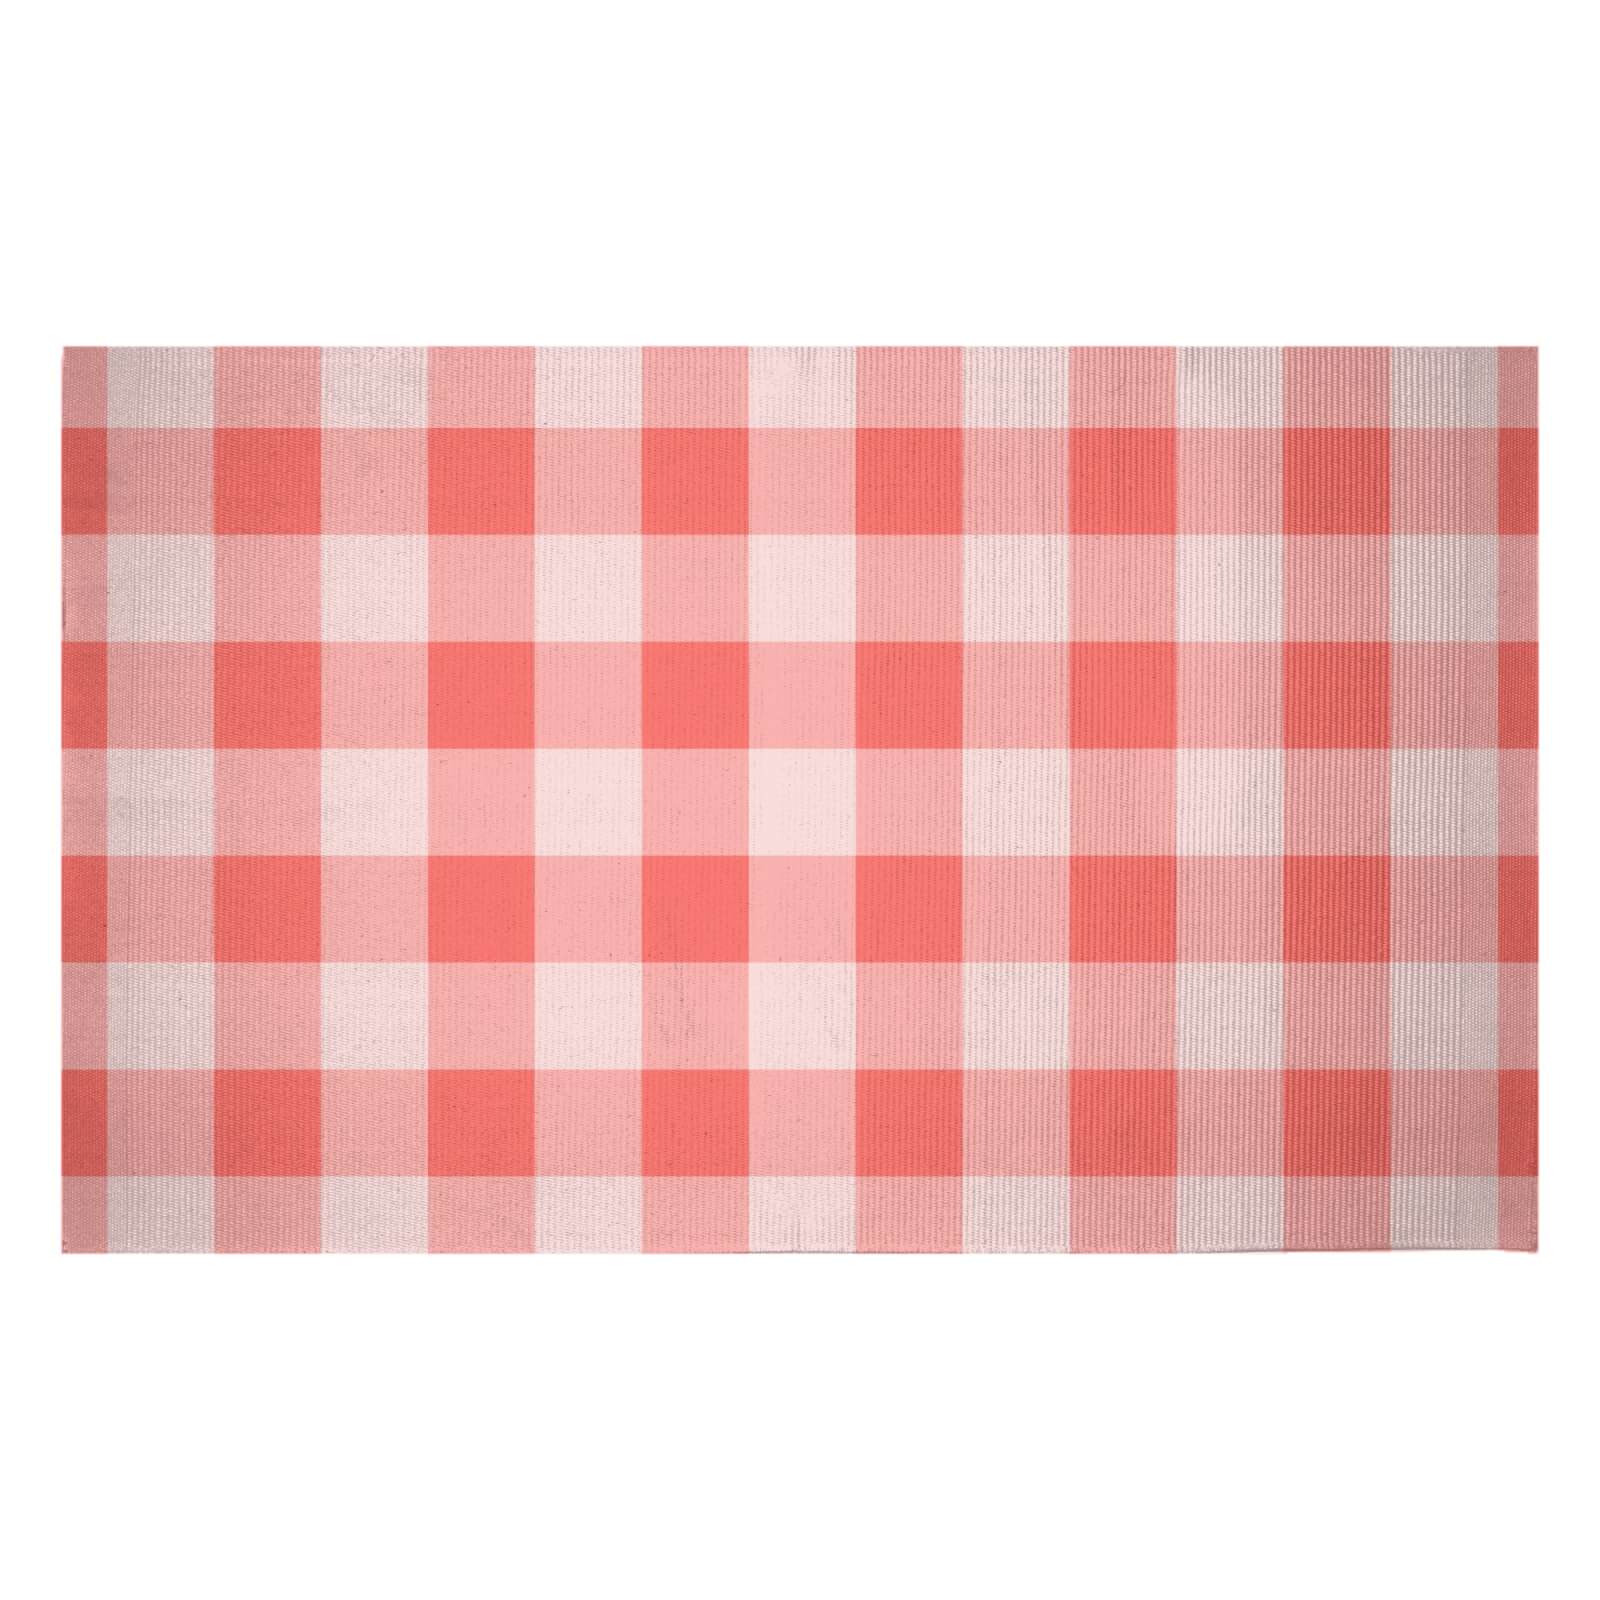 Decorsome Baking Blanket Red Woven Rug - Small